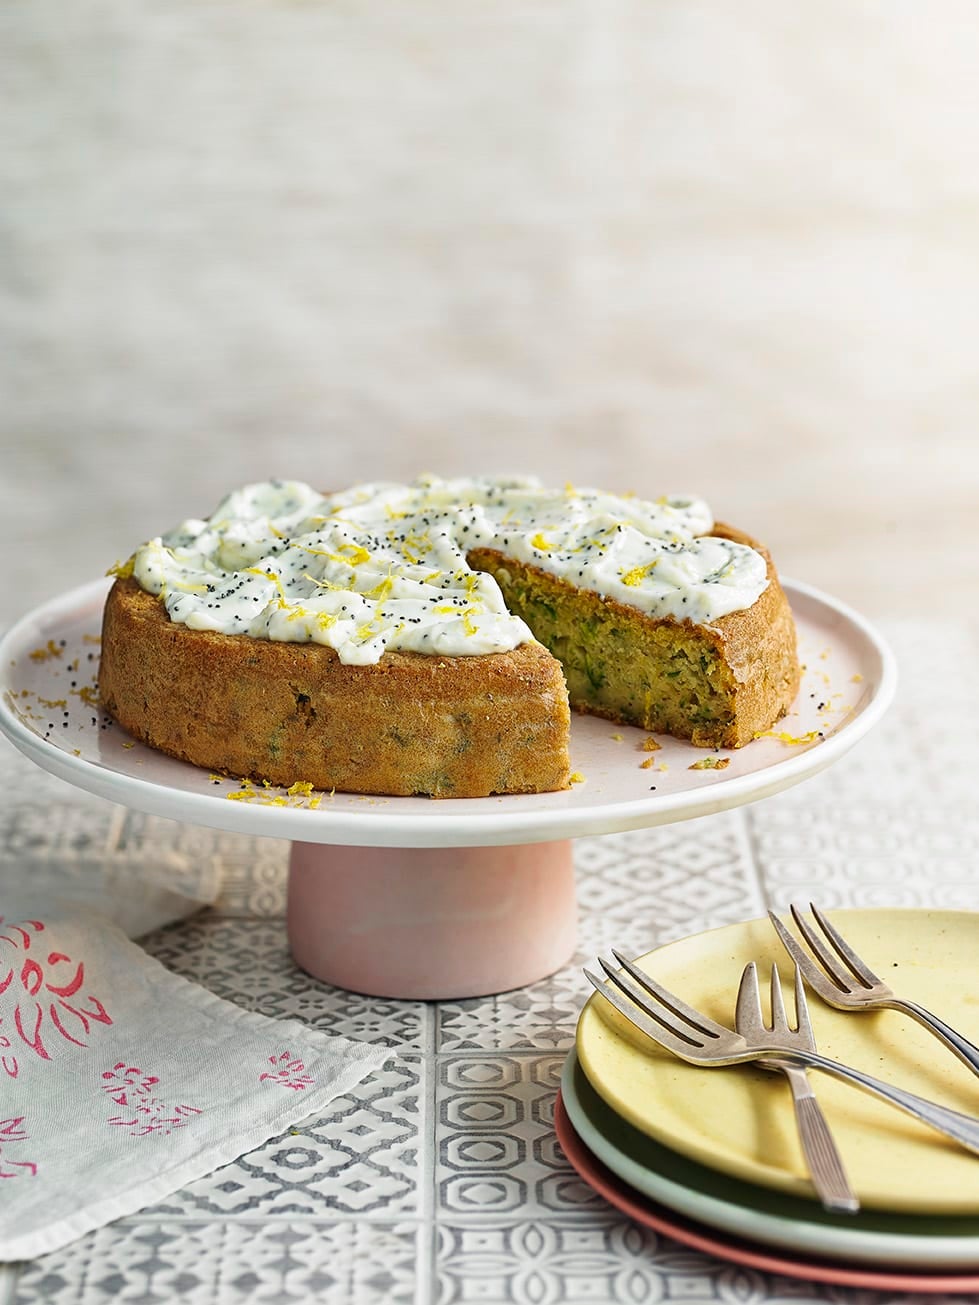 Photo of Courgette, lemon & poppy seed cake by WW